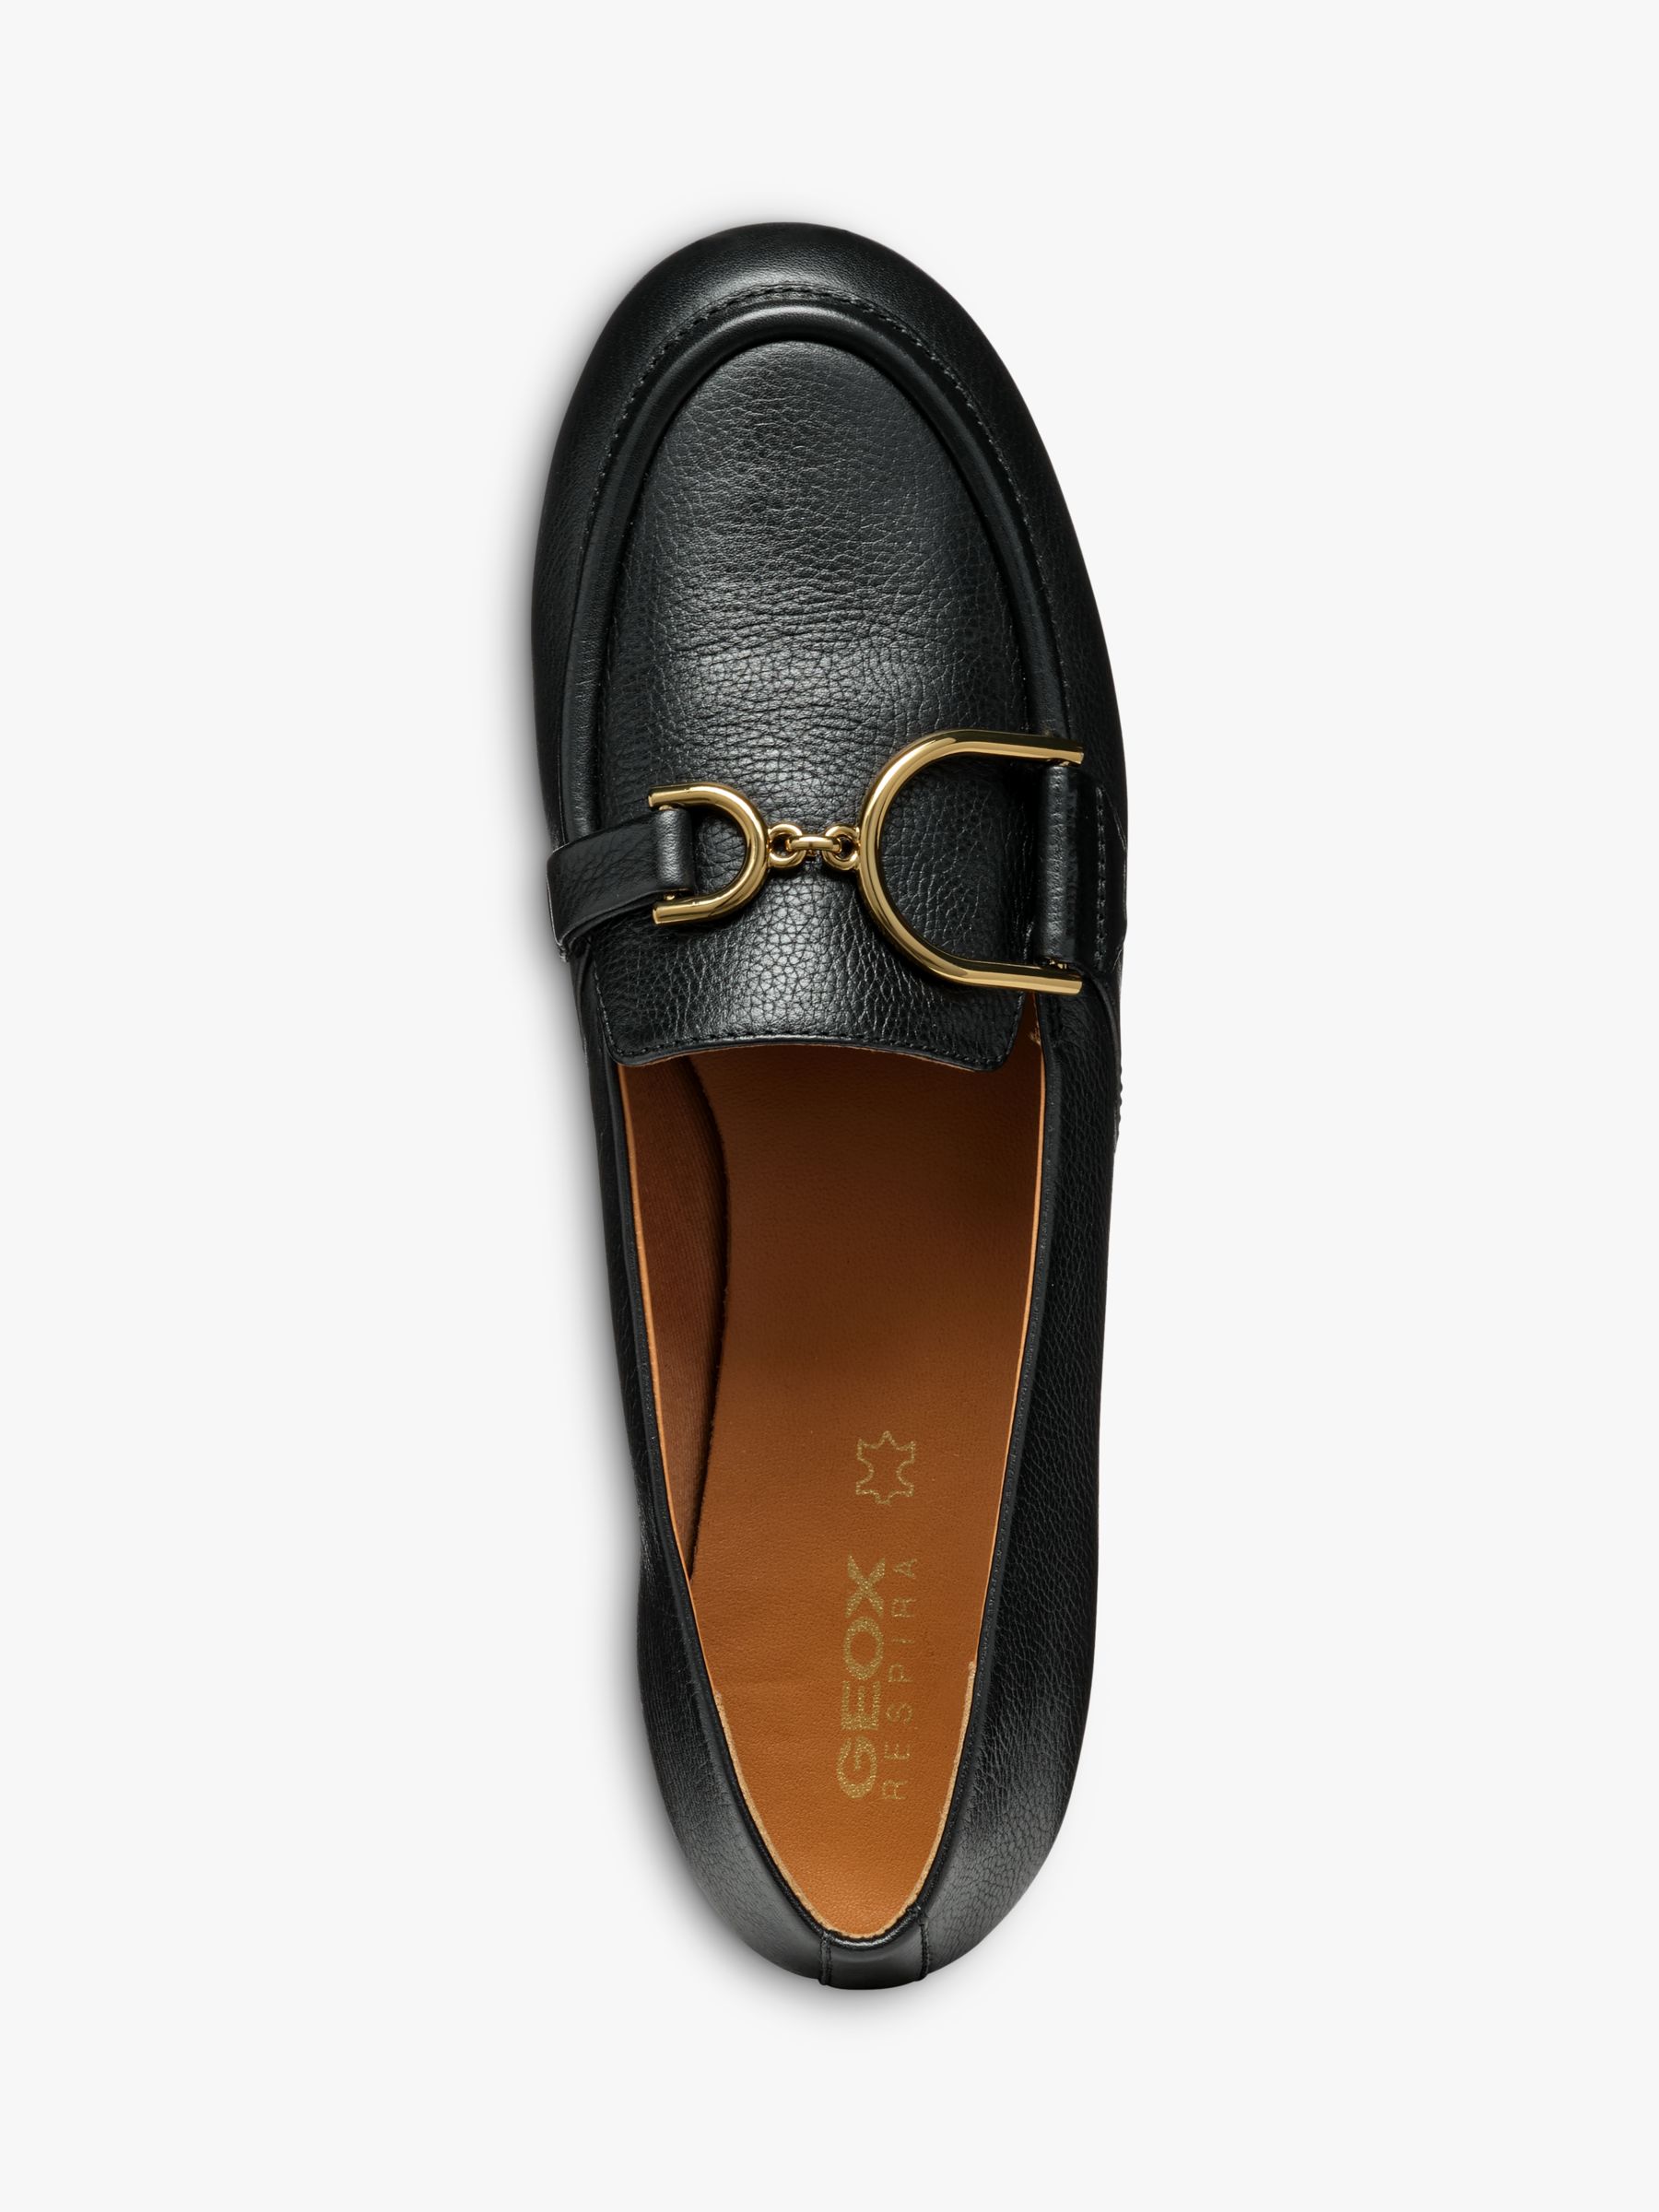 Geox Palmaria Leather City Loafers, Black at John Lewis & Partners